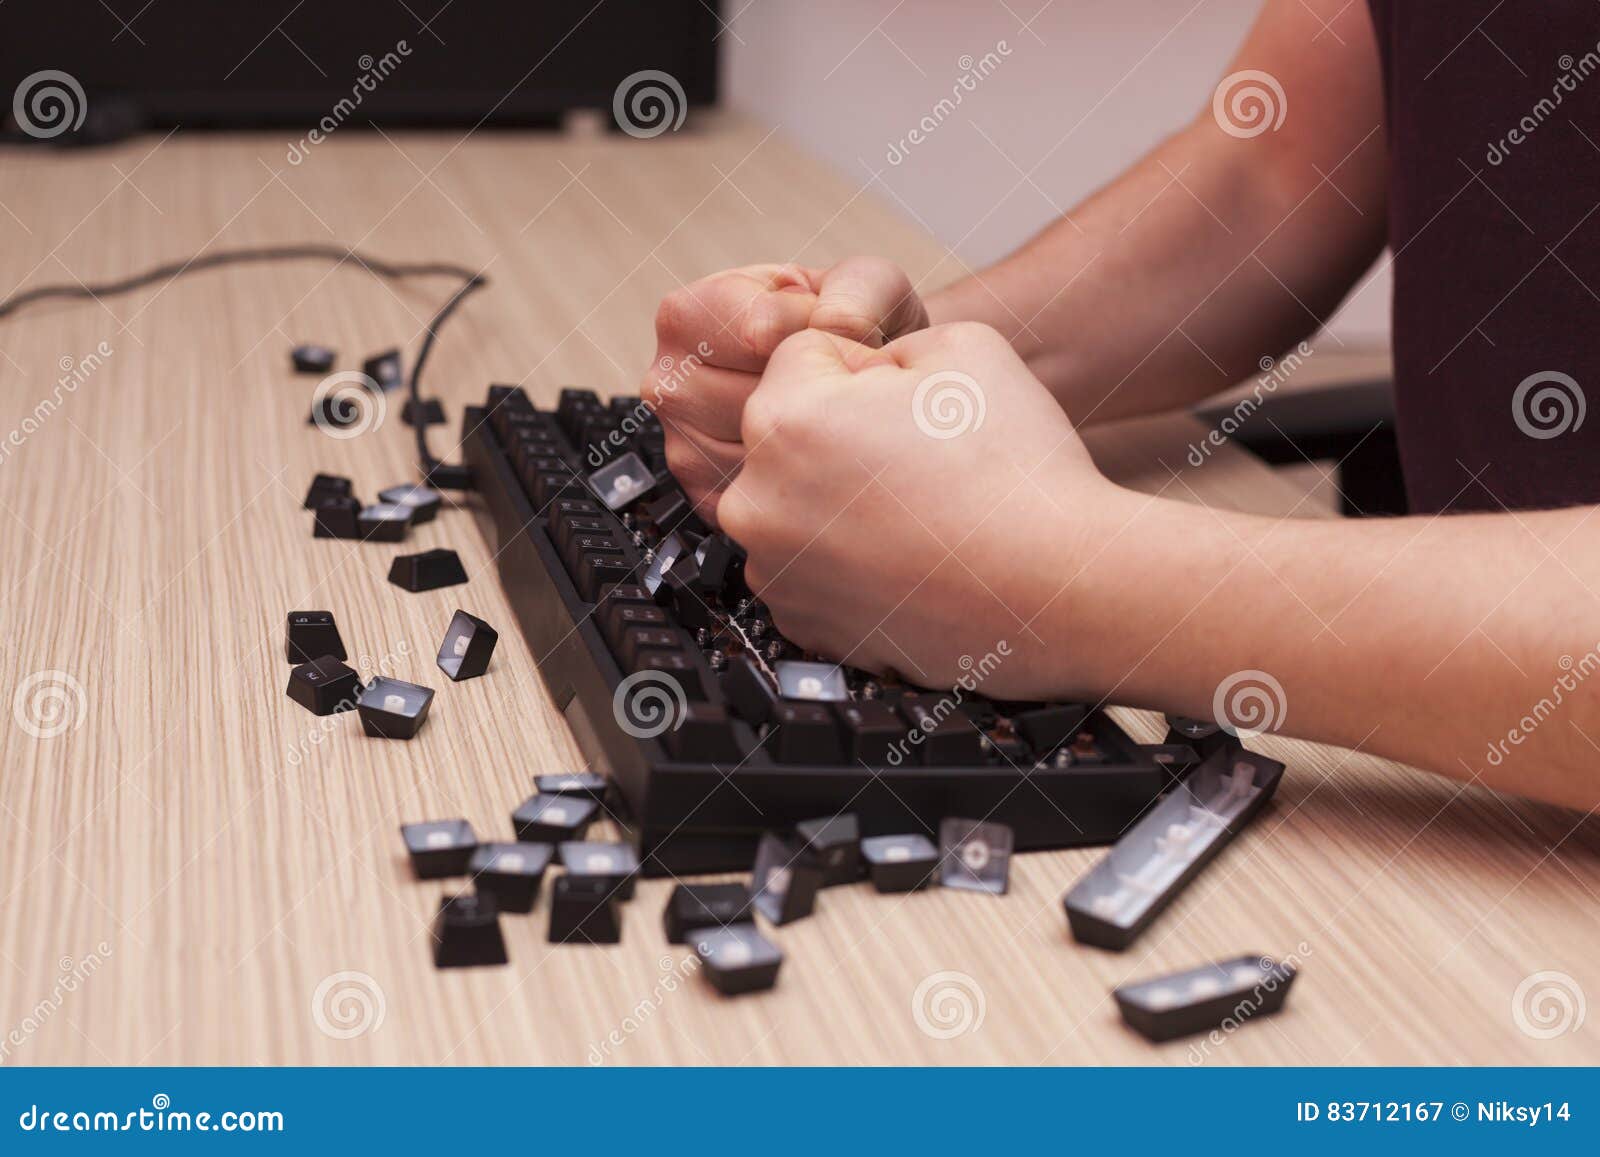 man-smashes-mechanical-computer-keyboard-rage-using-both-fists-stressed-completely-wrecks-anger-83712167.jpg